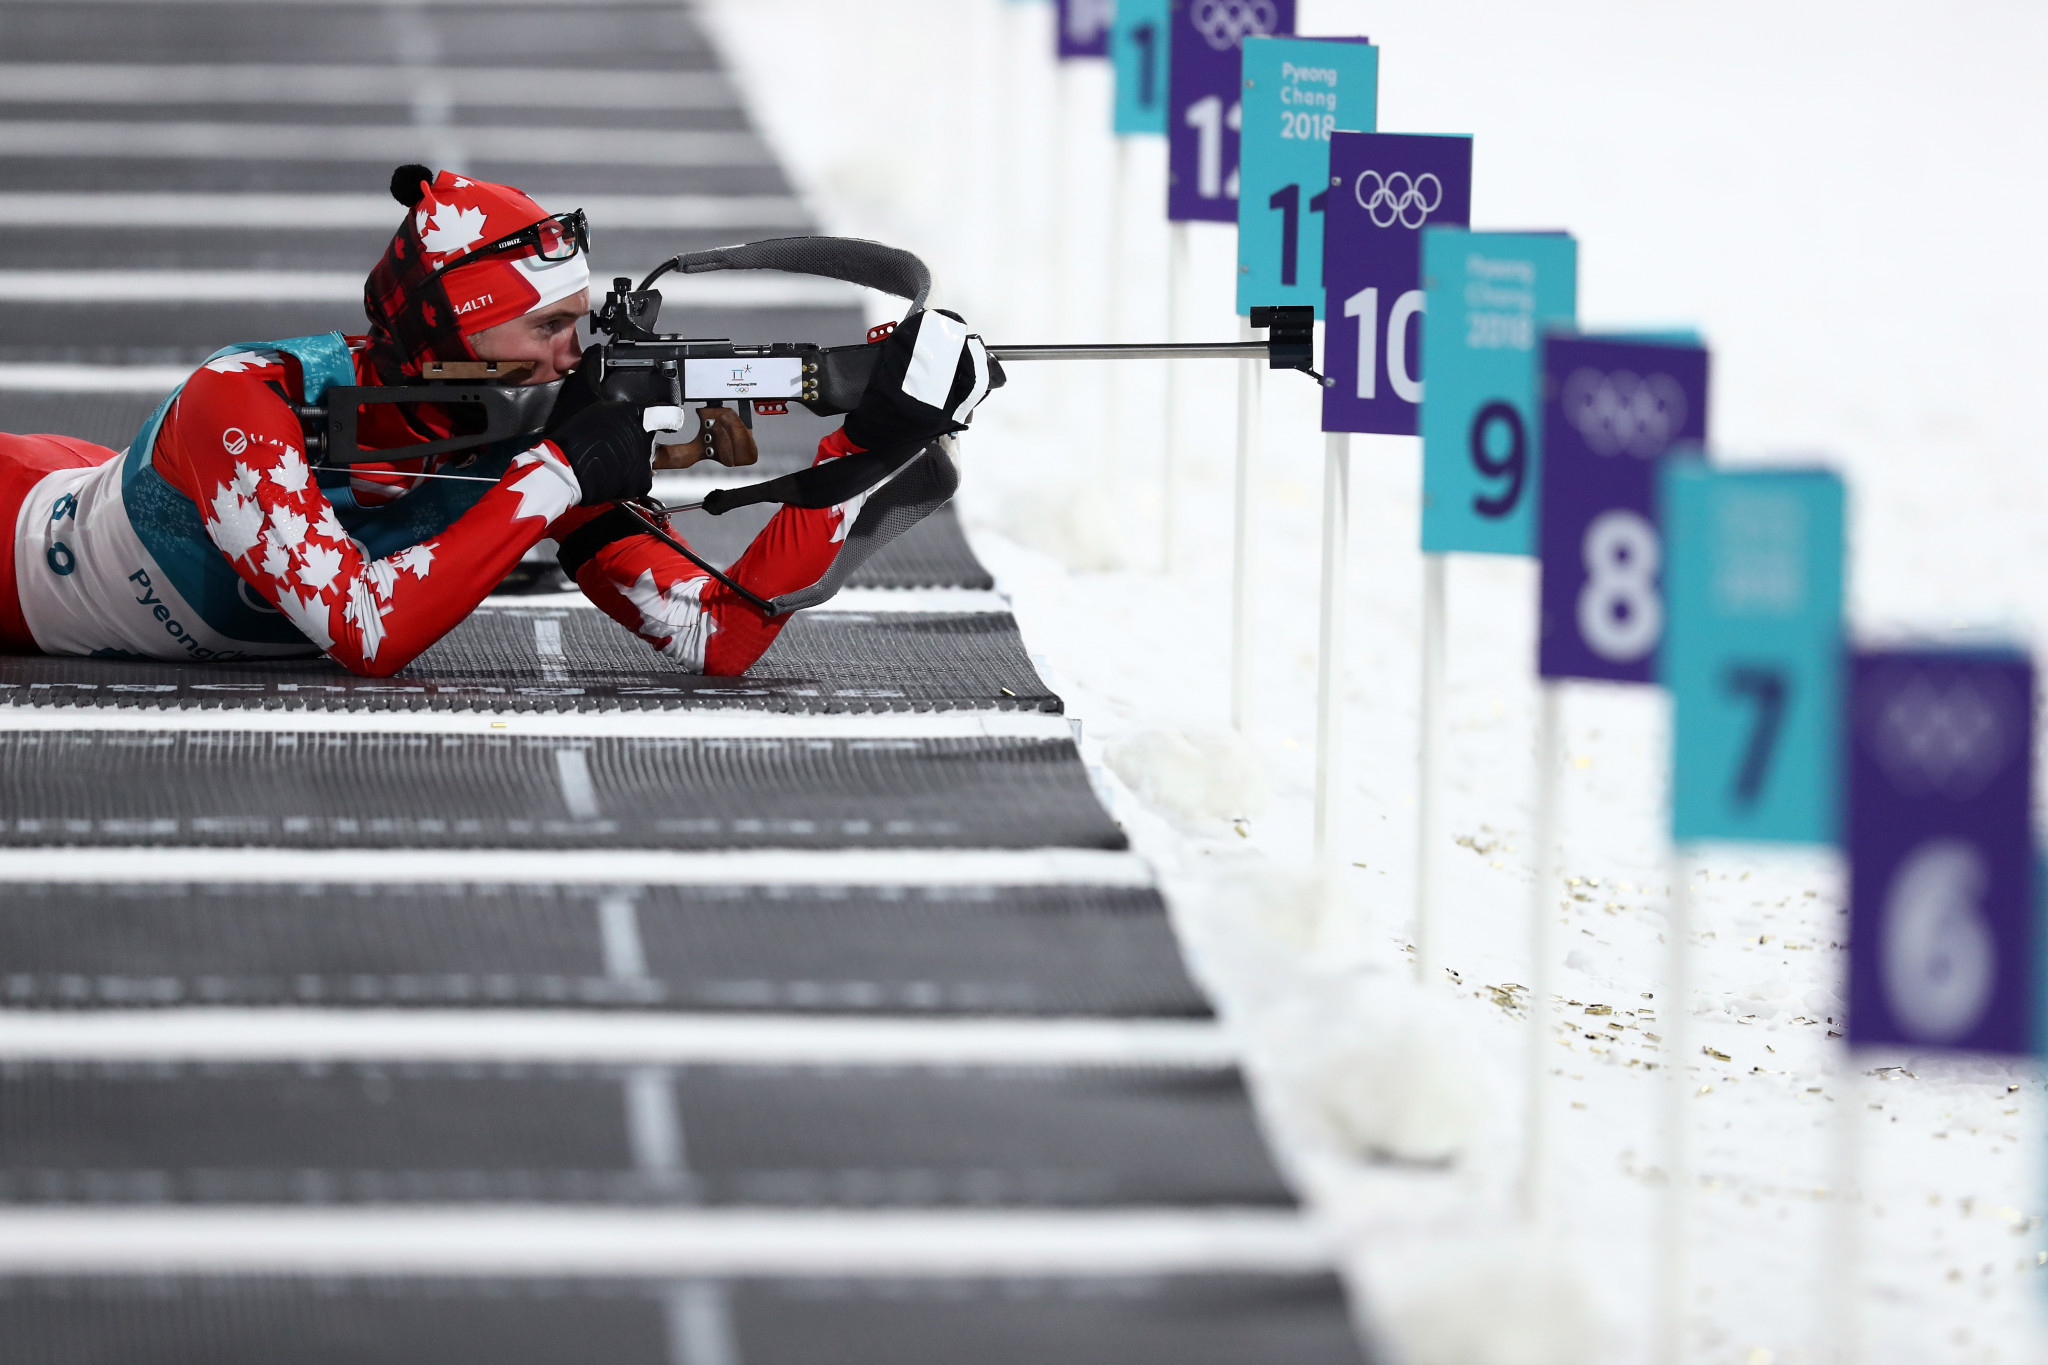 Biathlon Canada promised they will seek to build on Matthias Ahrens' legacy at upcoming Winter Olympic Games ©Getty Images